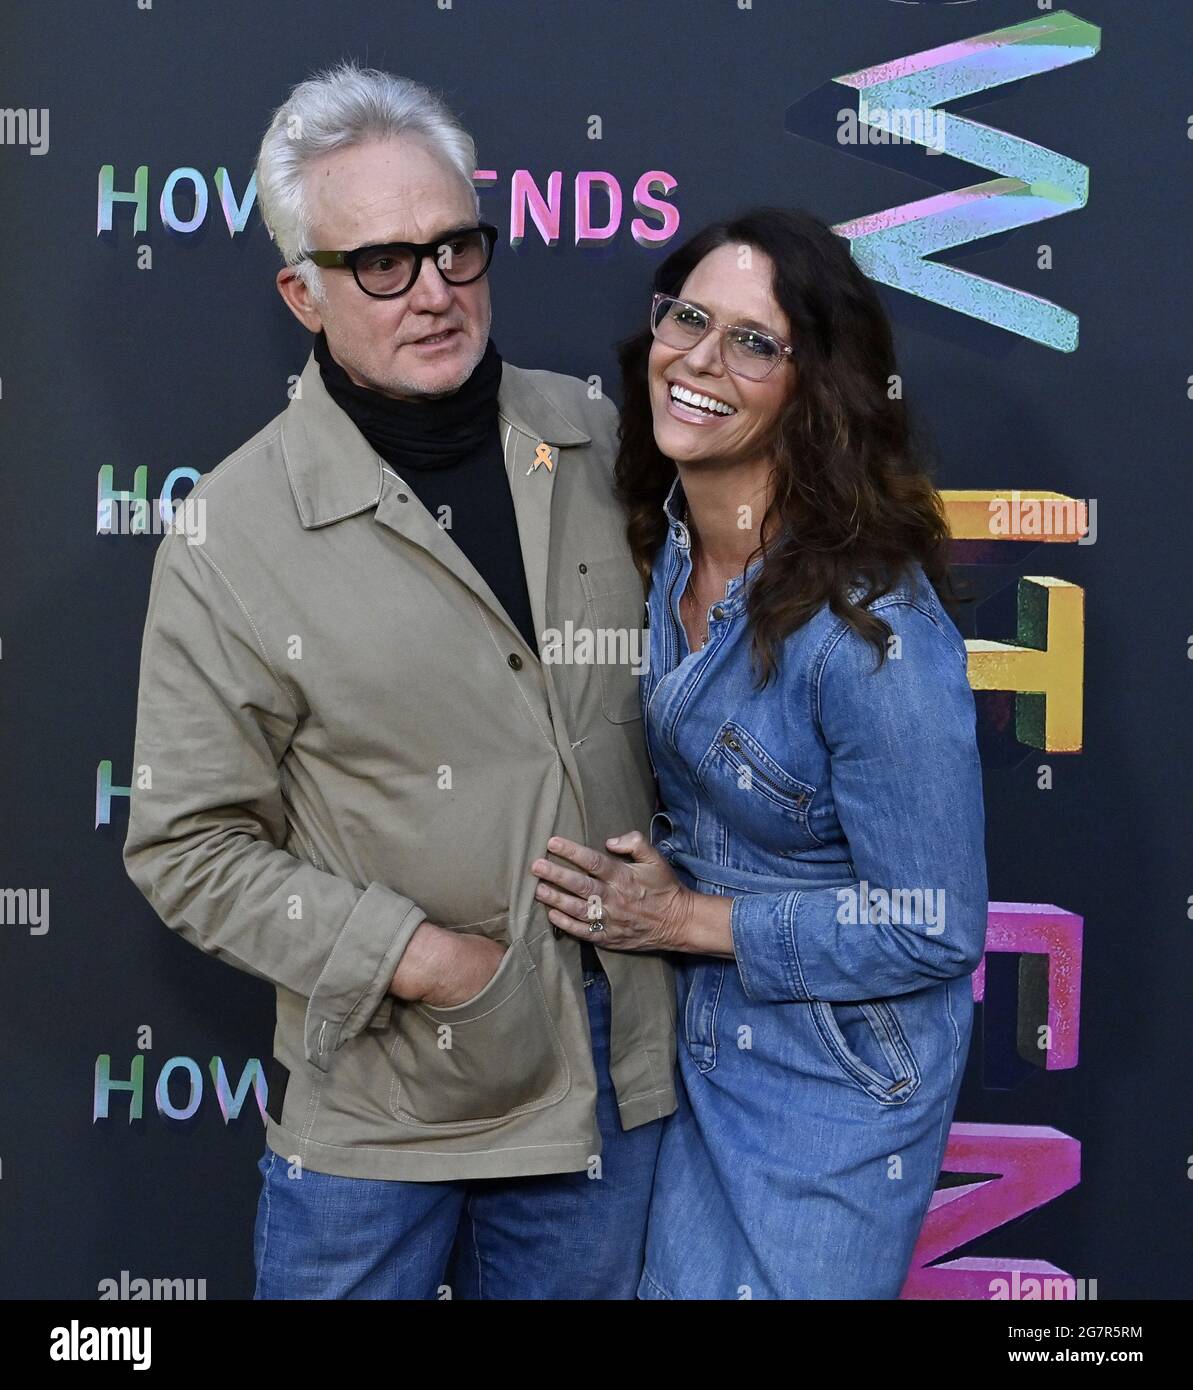 Los Angeles, United States. 16th July, 2021. Cast member Bradley Whirford and his wife, actress Amy Landecker attend the premiere of the motion picture comedy 'How It Ends' at NeueHouse in Los Angeles on Thursday, July 15, 2021. Storyline: In this feel-good apocalyptic comedy, Liza (Zoe Lister-Jones) embarks on a hilarious journey through LA in hopes of making it to her last party before it all ends, running into an eclectic cast of characters along the way. Photo by Jim Ruymen/UPI Credit: UPI/Alamy Live News Stock Photo